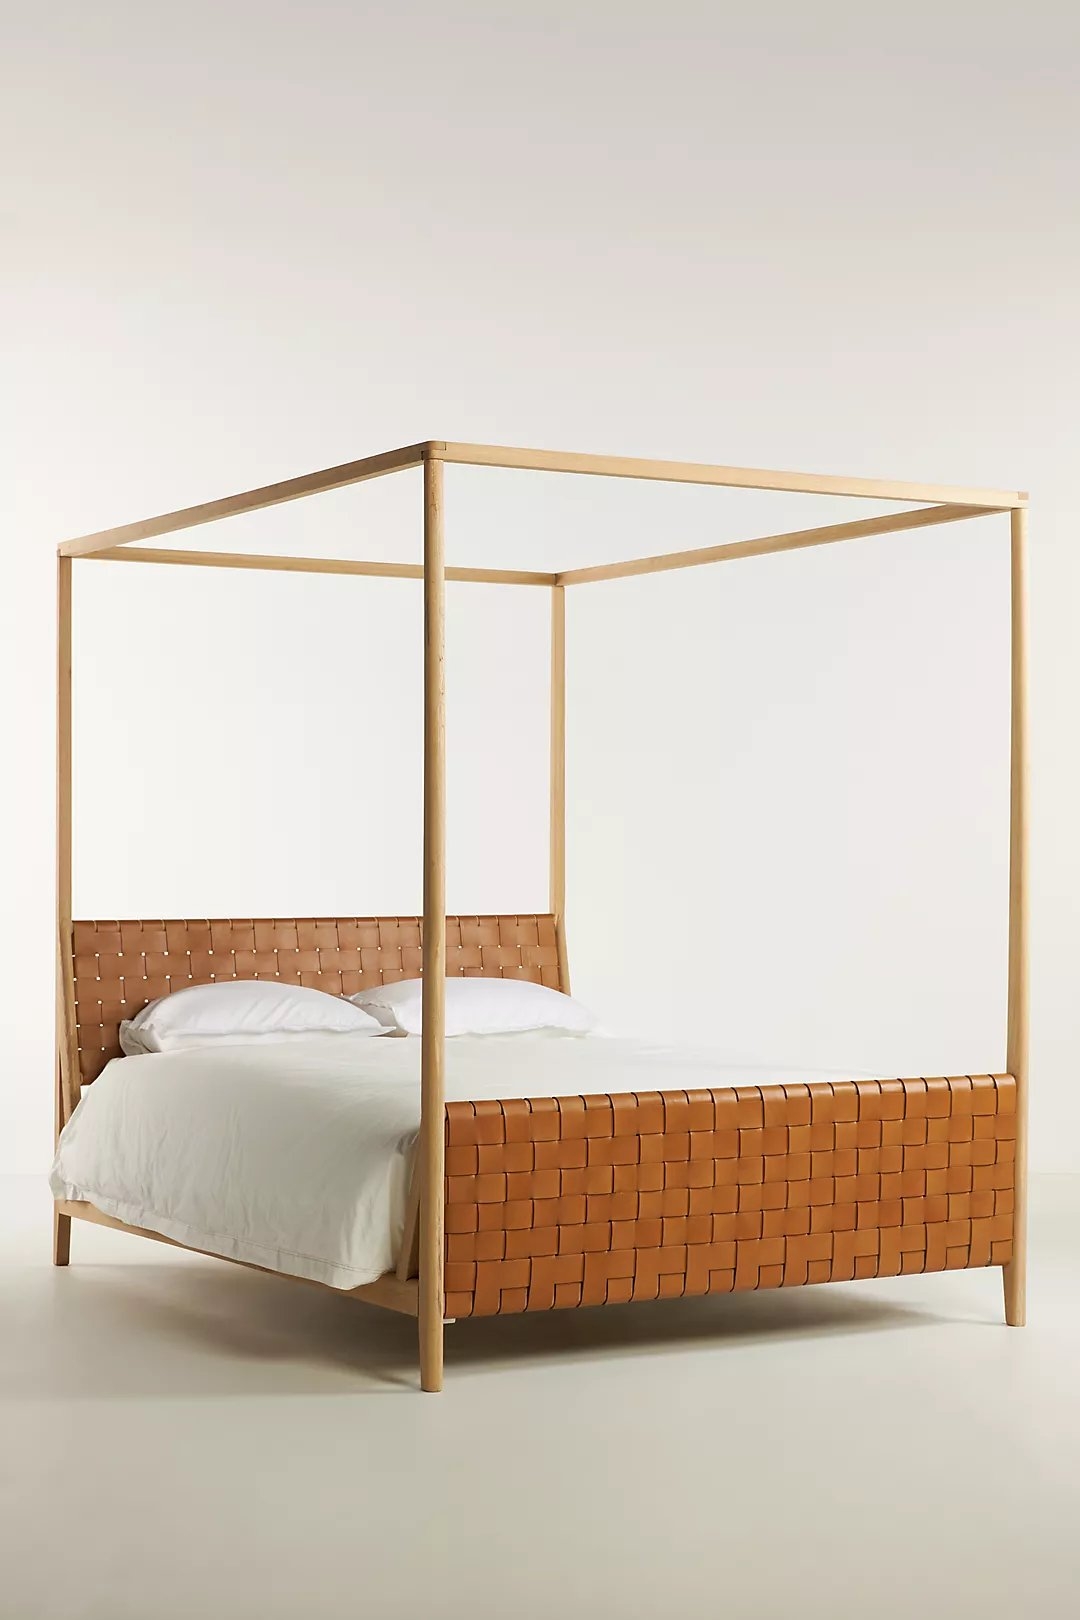 Leather Cove Canopy Bed - Image 2